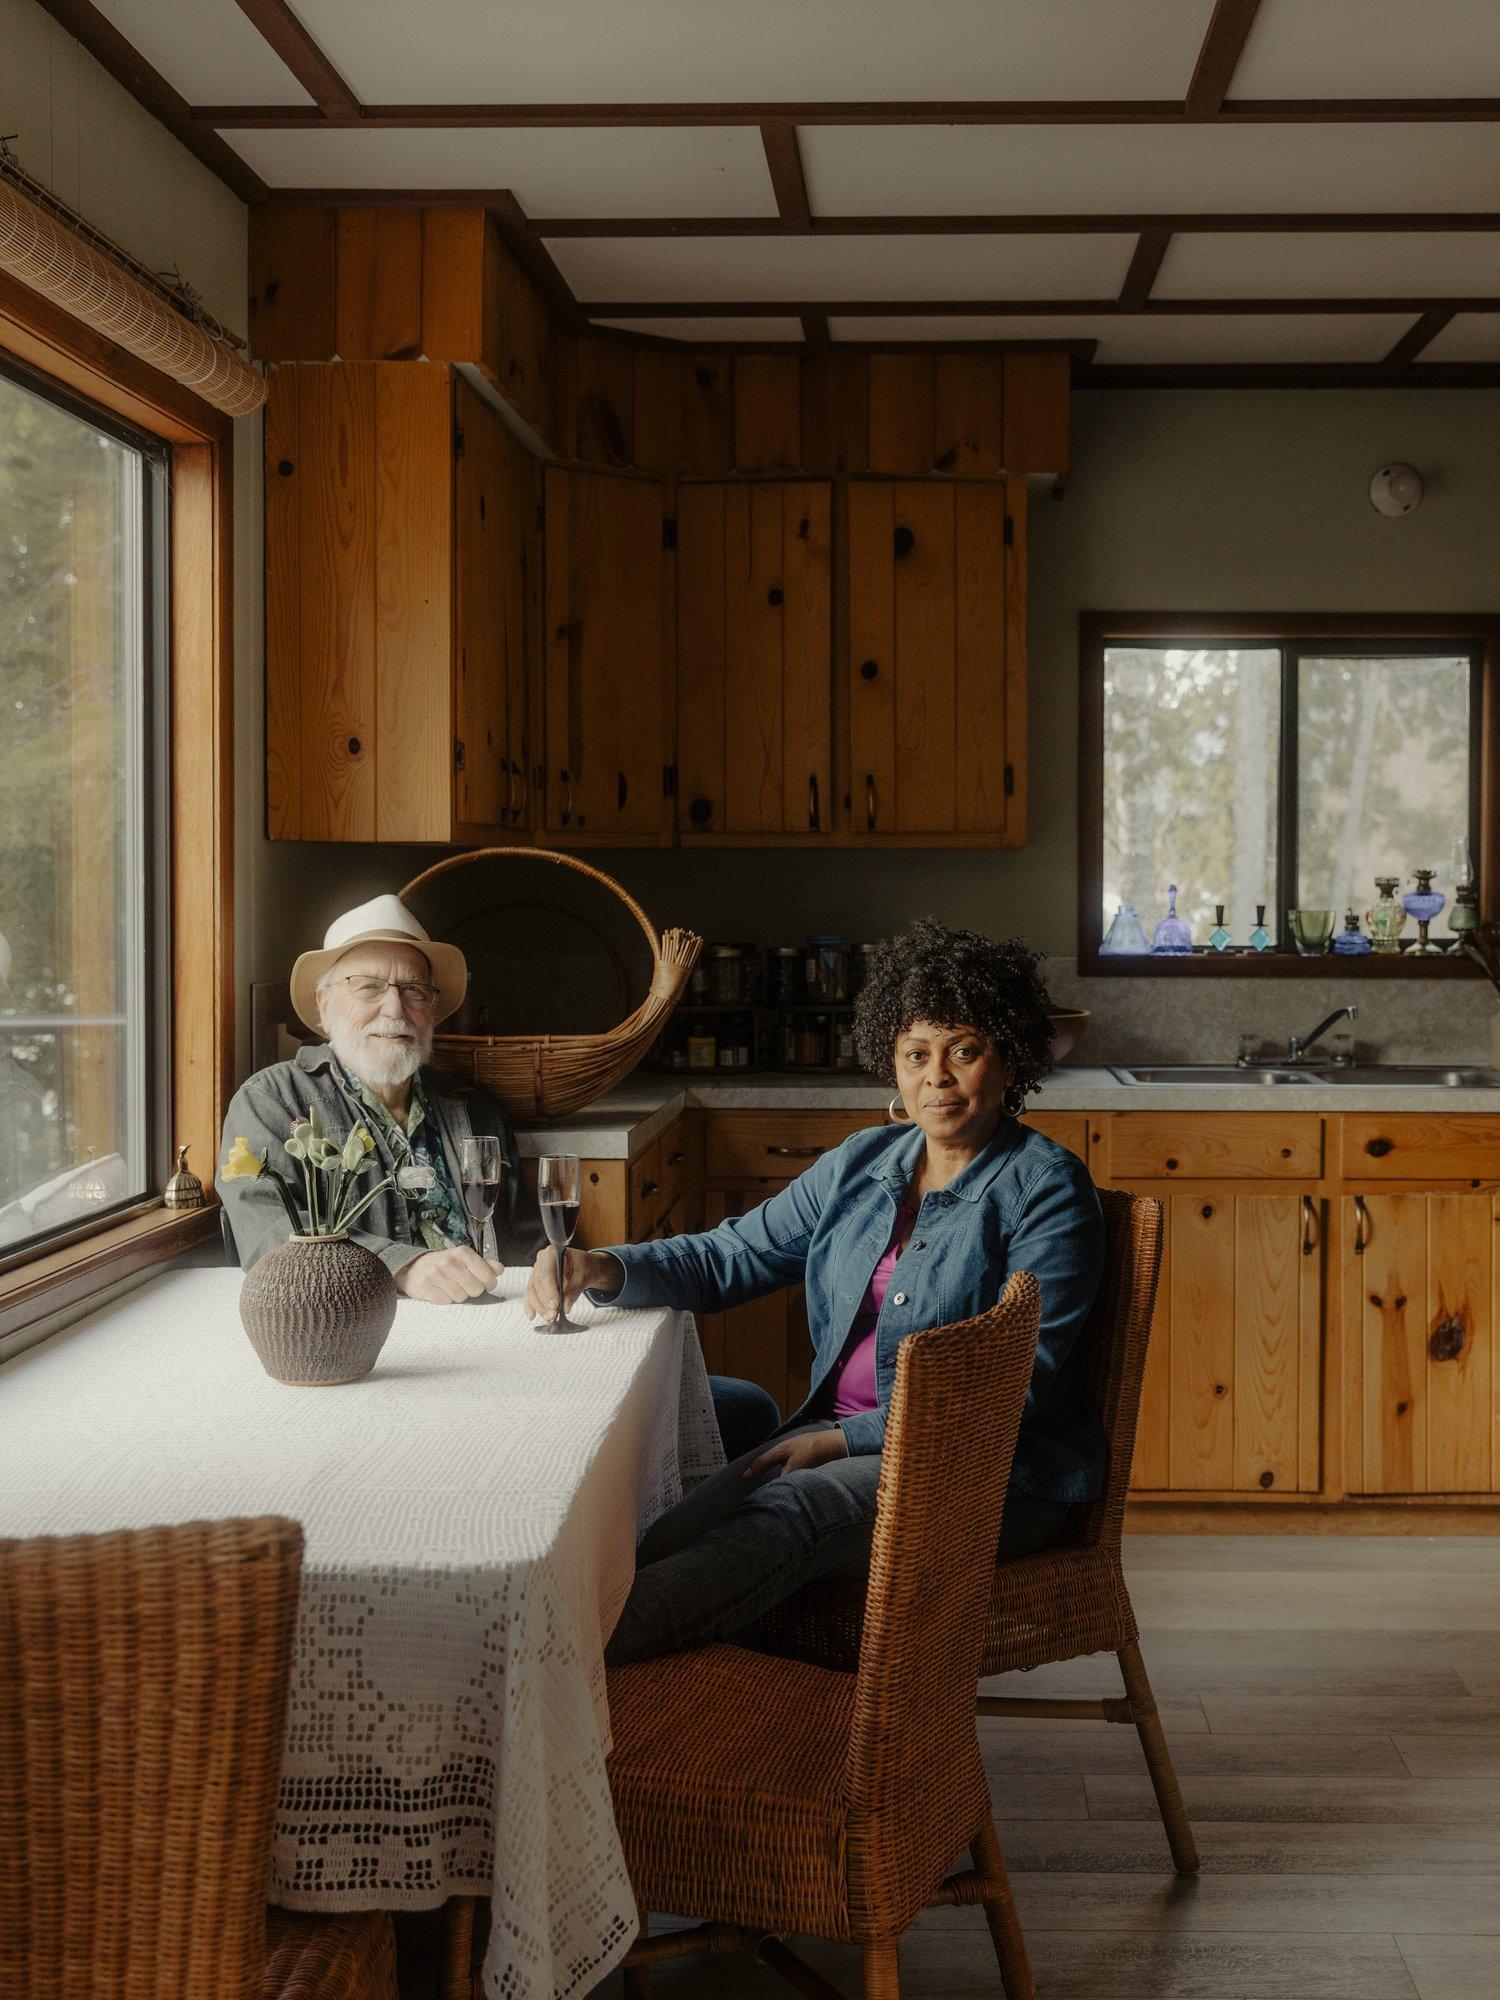 Shields and Askew are proud of their quintessential Canadian cottage. âWe absolutely do not rent our cottage because itâs our home,â she says.